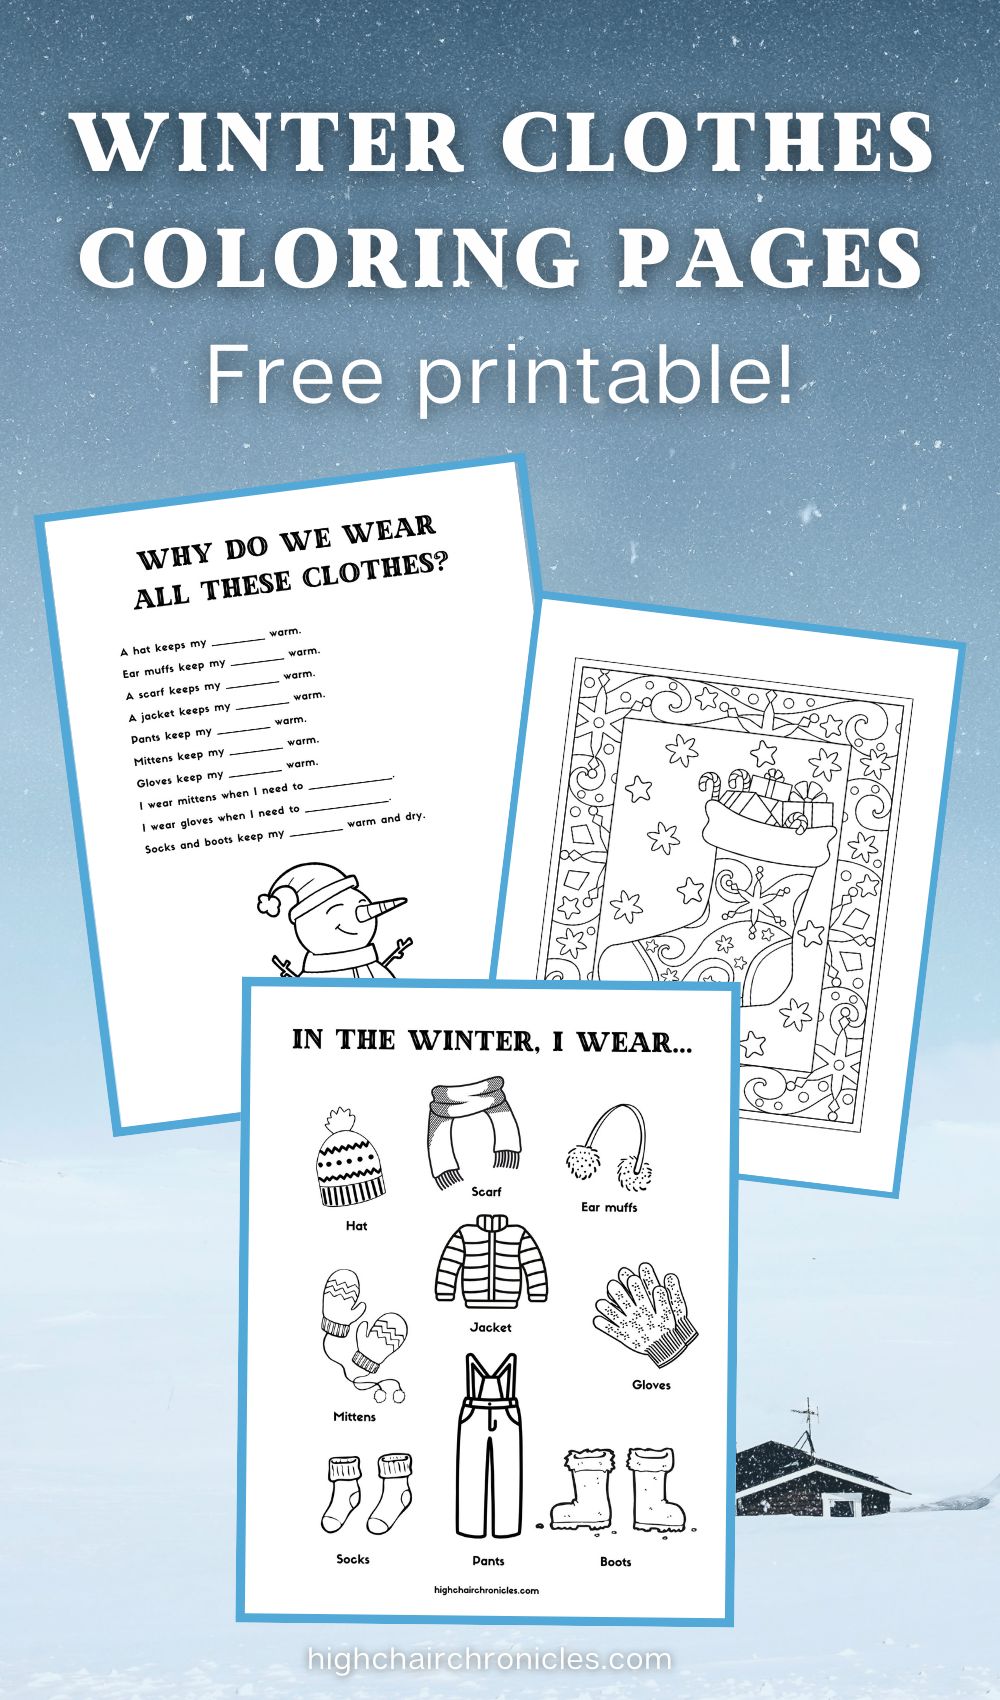 Pinterest graphic with text: Winter Clothes Coloring Pages - Free Printable